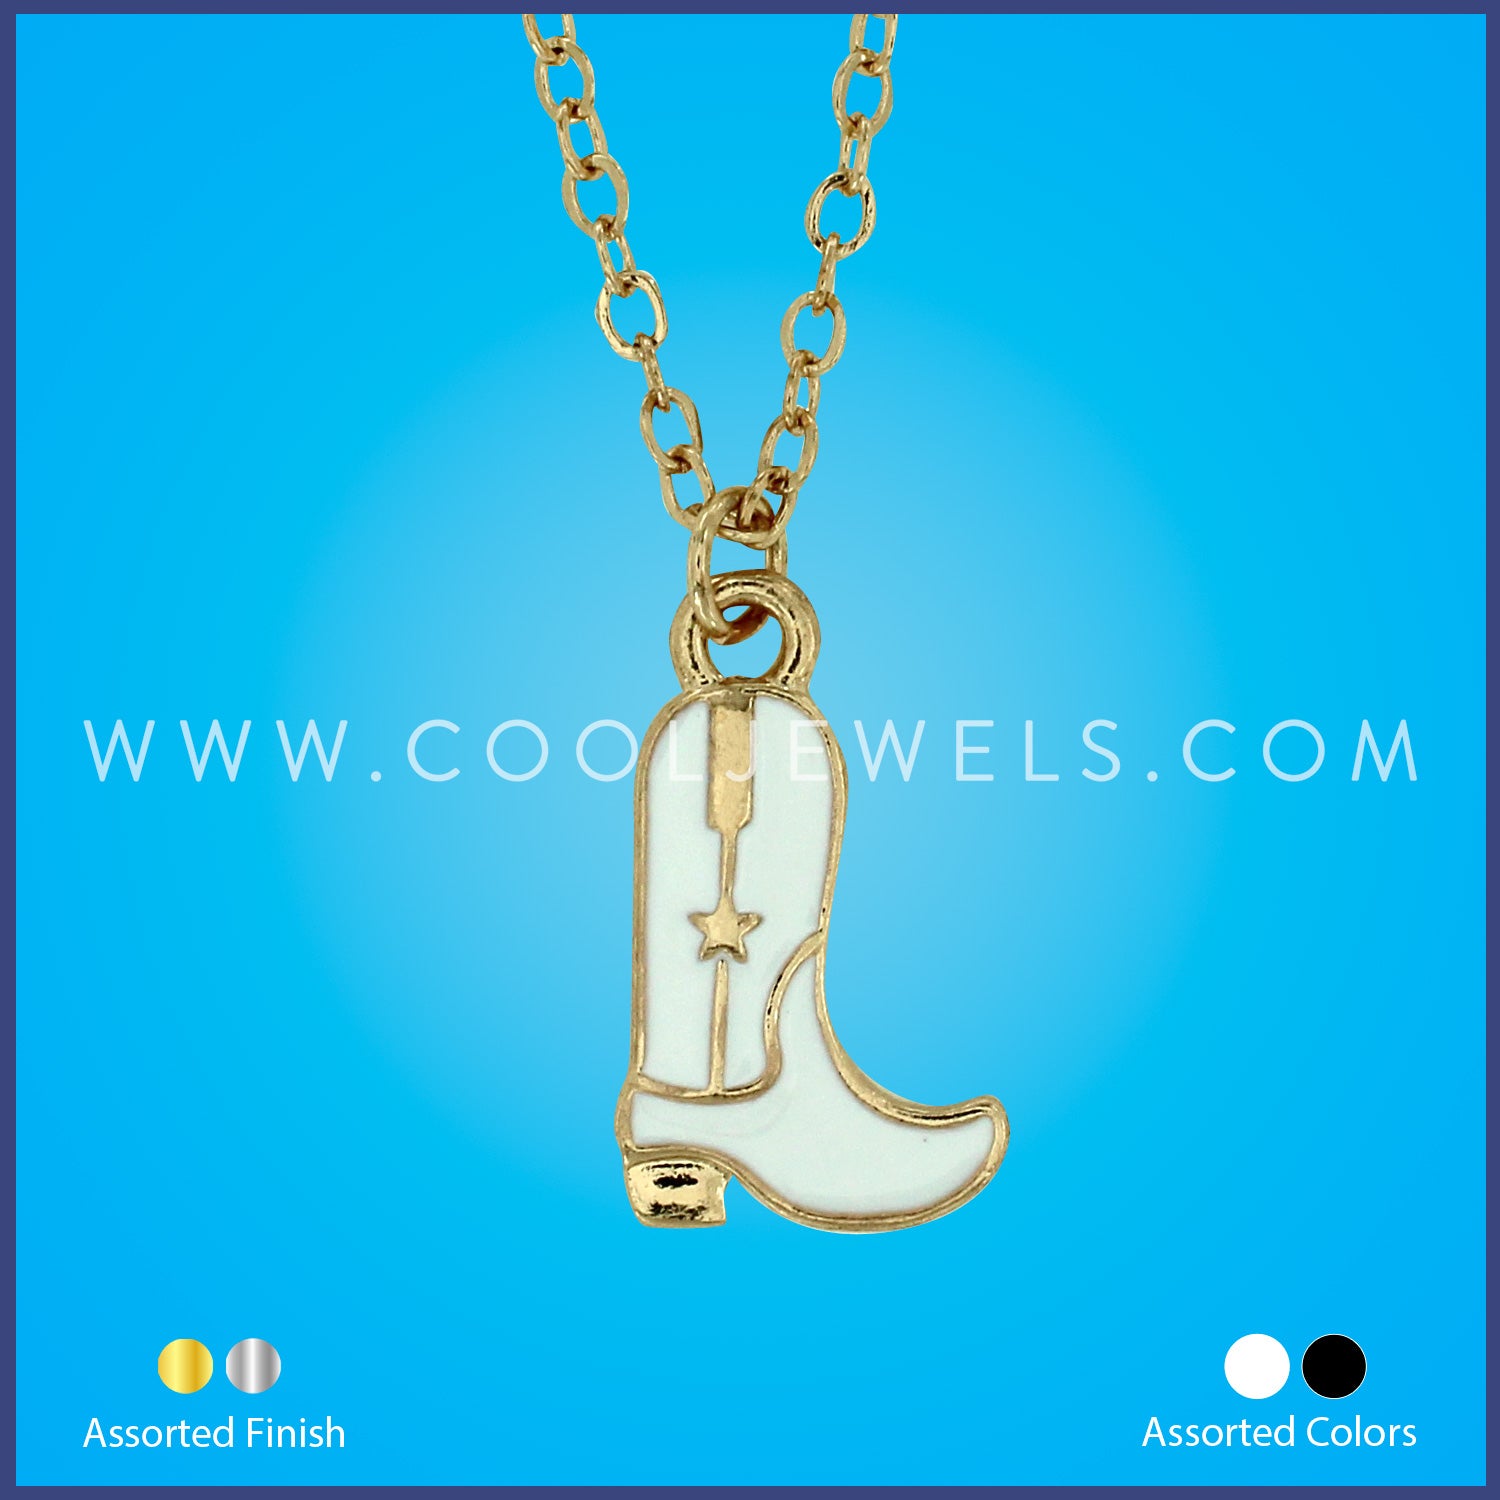 LINK CHAIN NECKLACE WITH ENAMEL BOOT PENDANT - ASSORTED COLORS